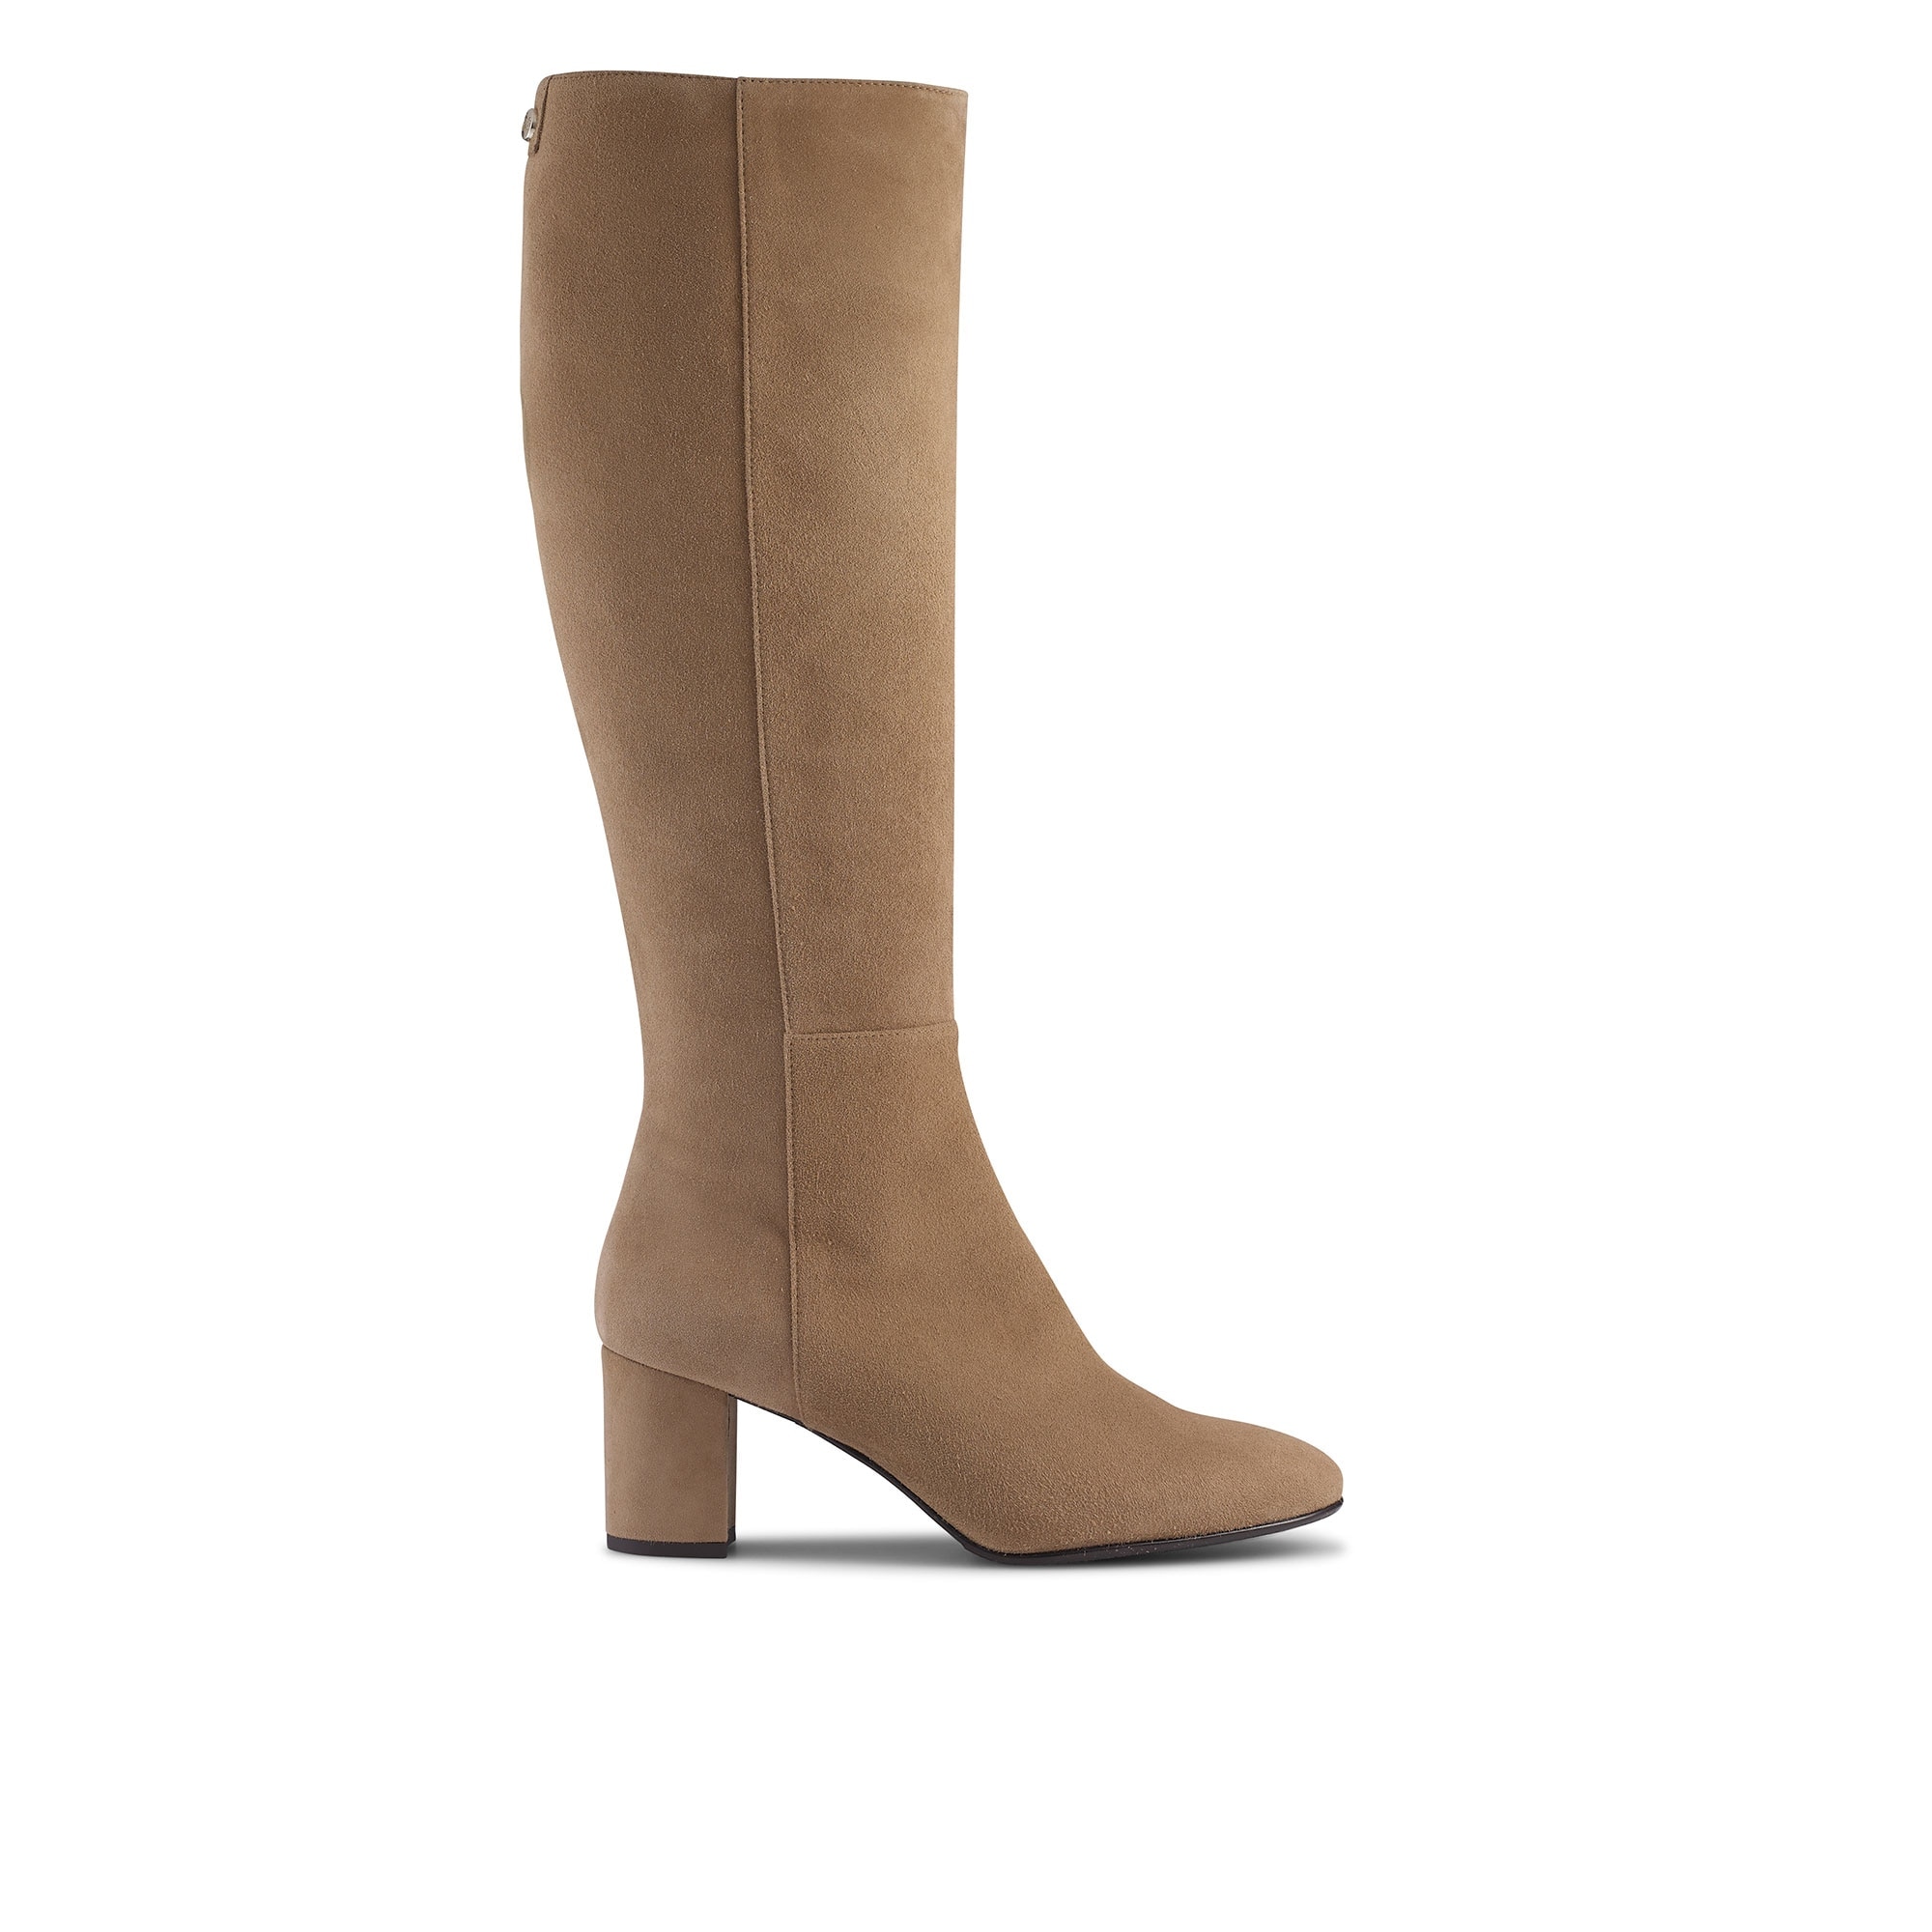 Russell & Bromley + Dressage Boot